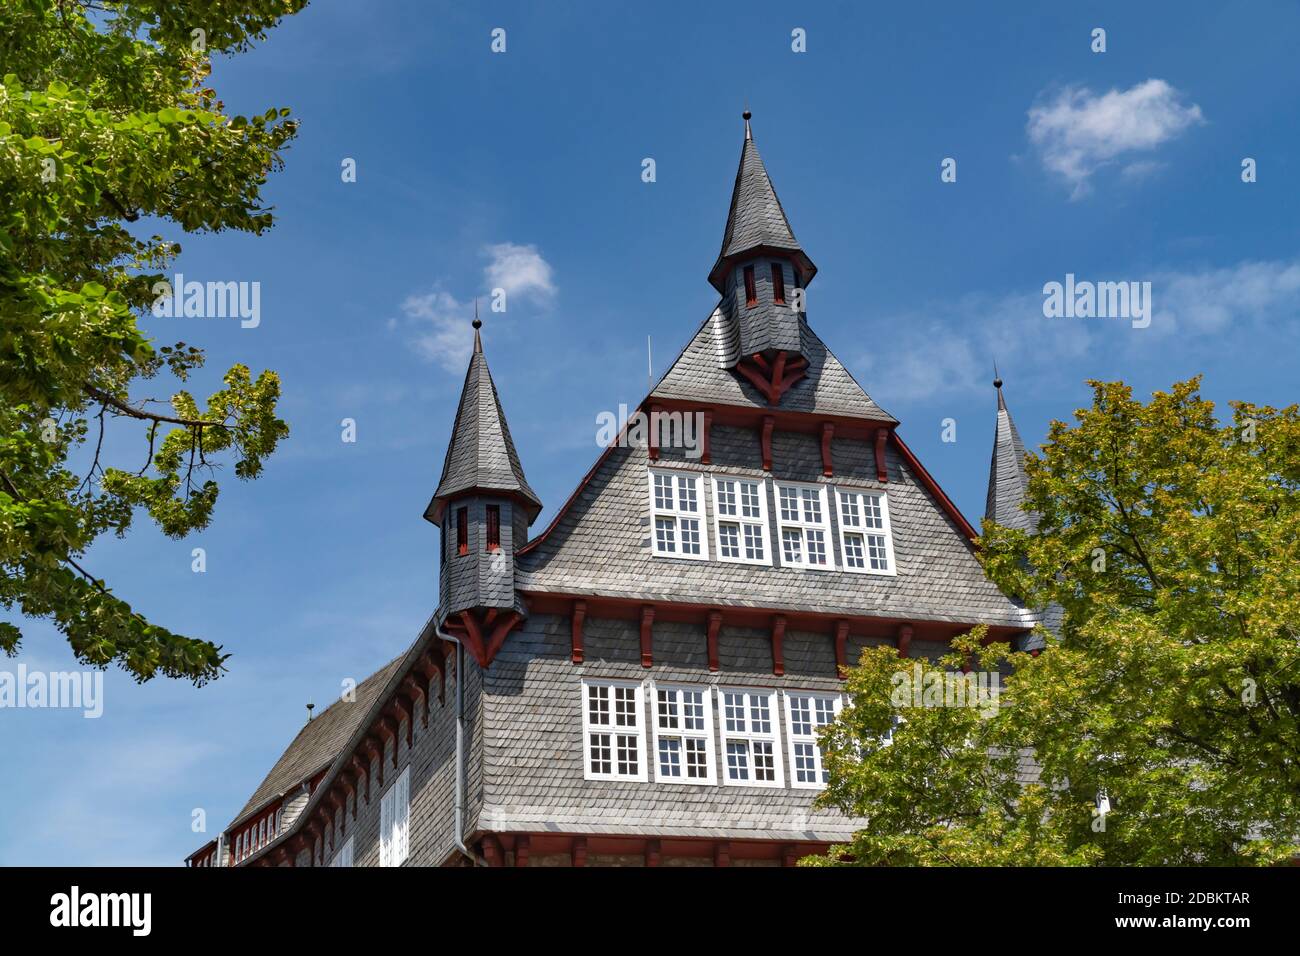 town hall, fritzlar, small town, historic, tradition, town, germany, north hesse, building, sky, clouds, summer, imposing, slate, stone house, towers, Stock Photo